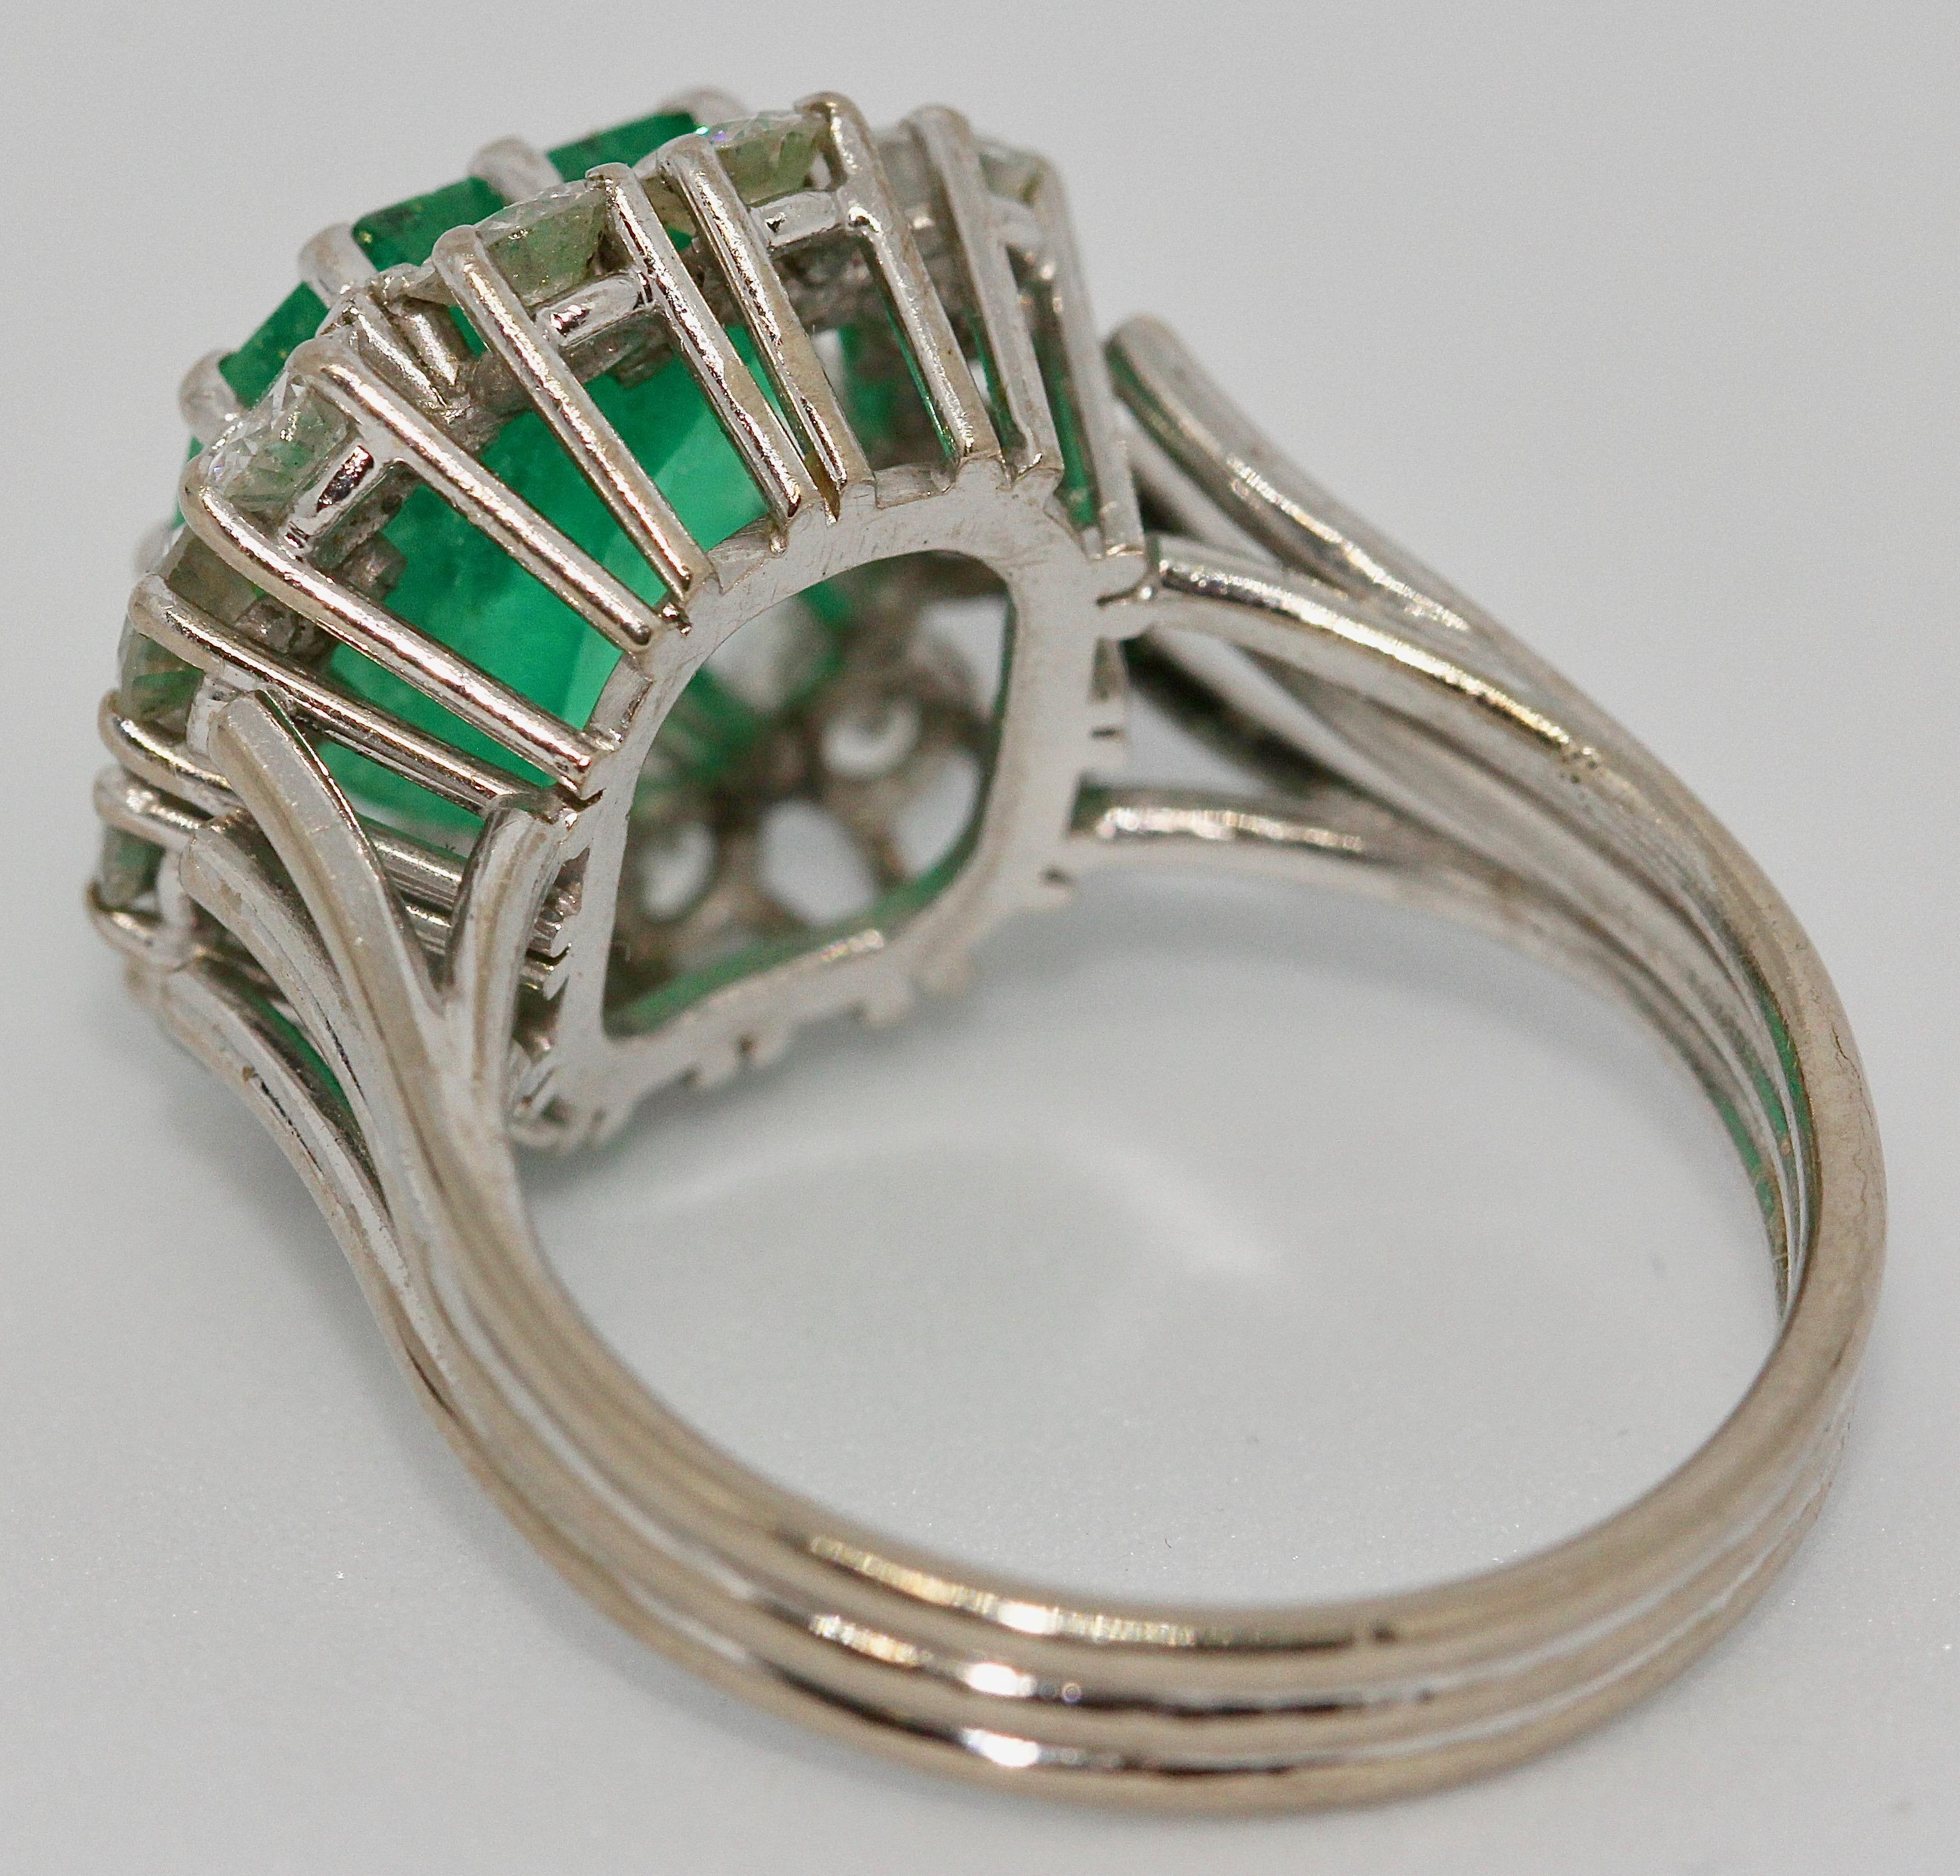 Luxurious 18 Karat White Gold Ring with Large Emerald and 12 Diamonds In Good Condition For Sale In Berlin, DE